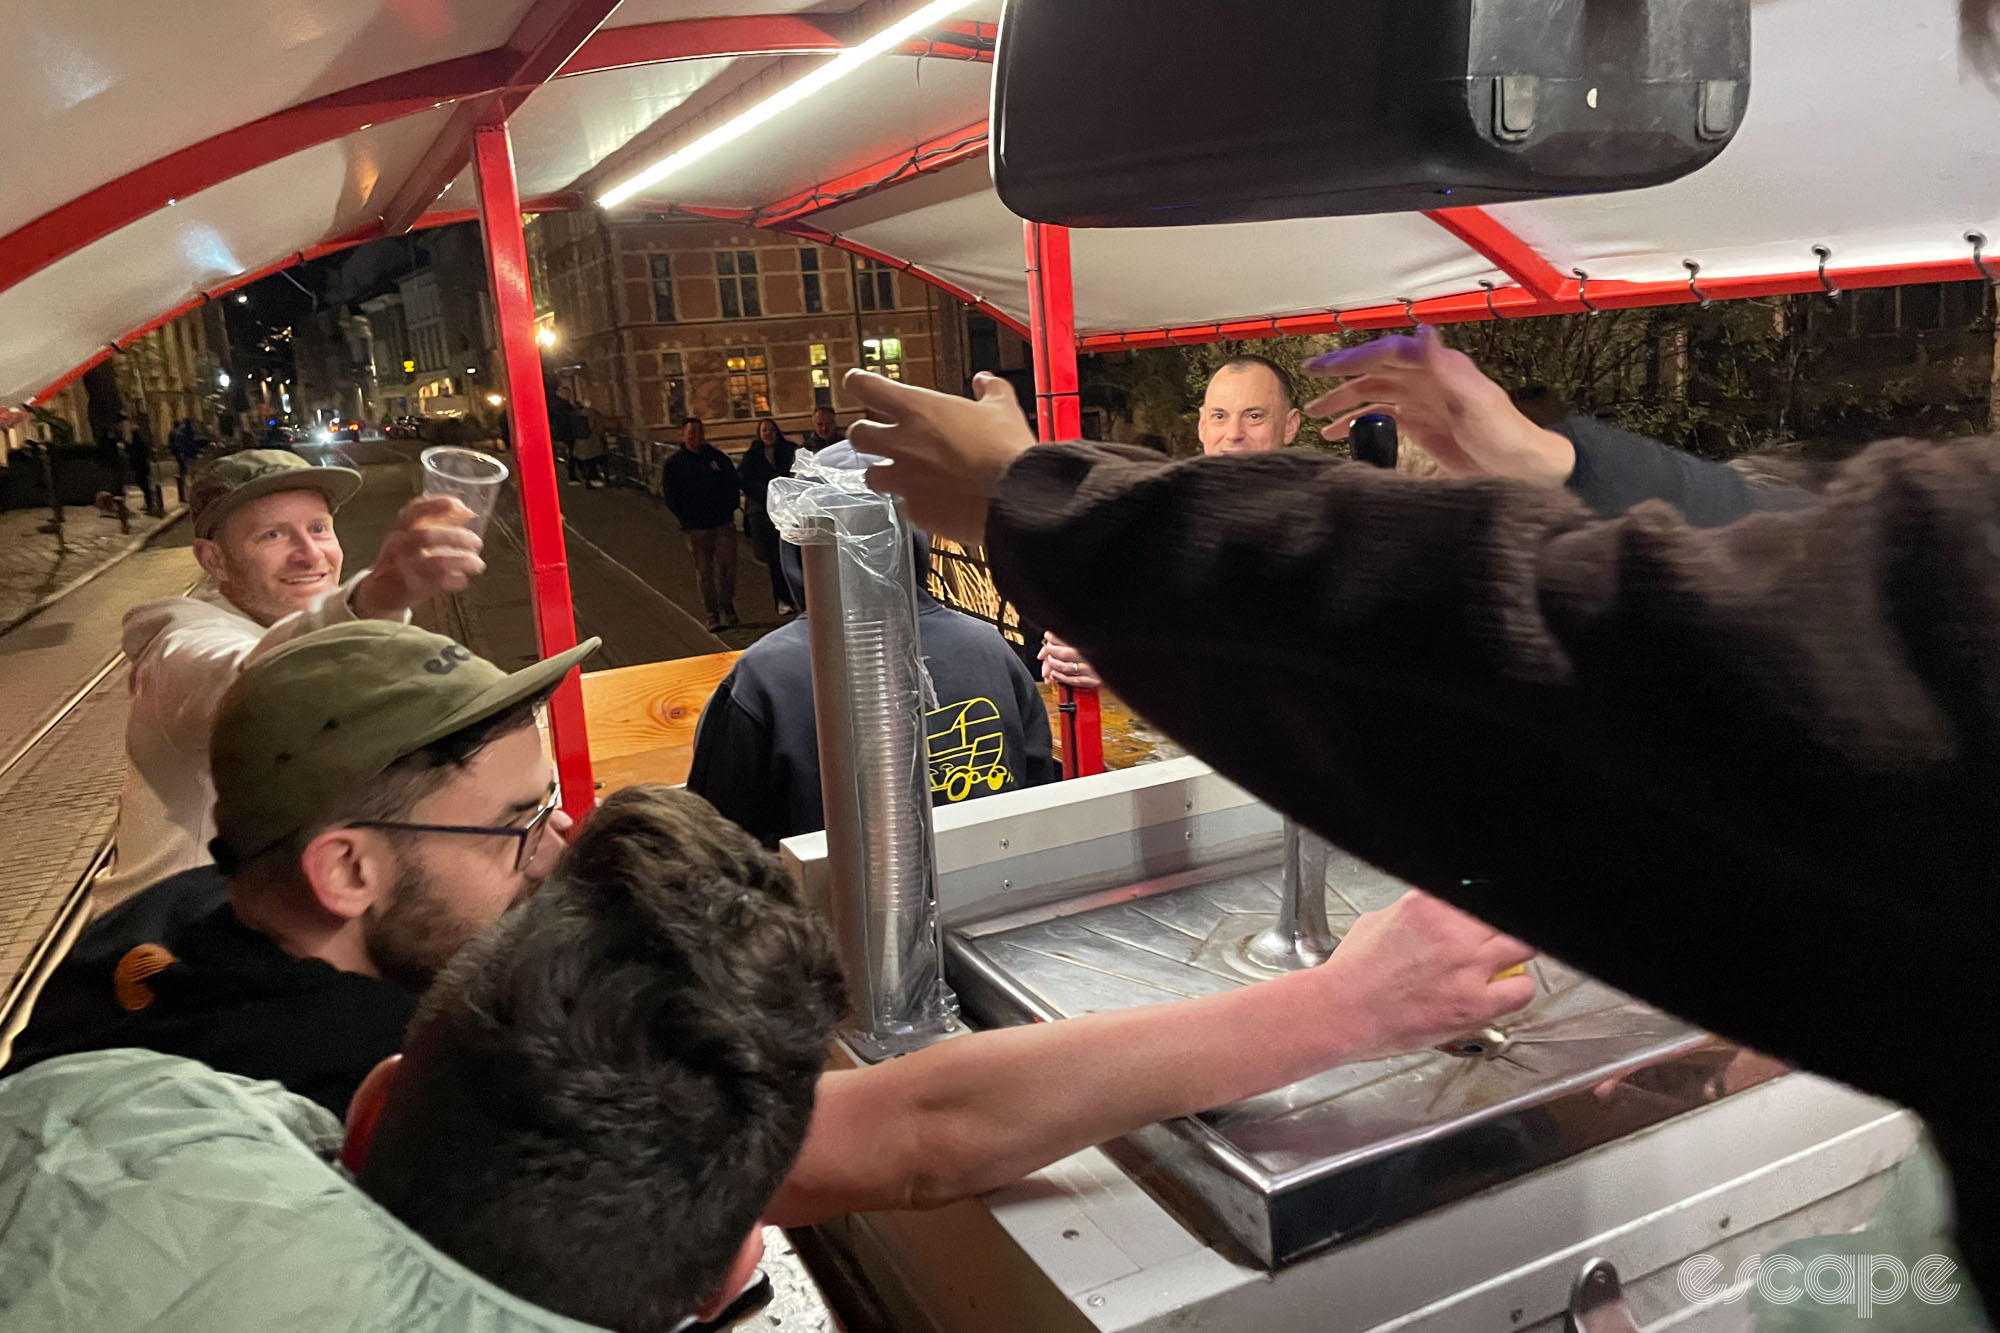 Many hands reaching across and toward the central beer tap.